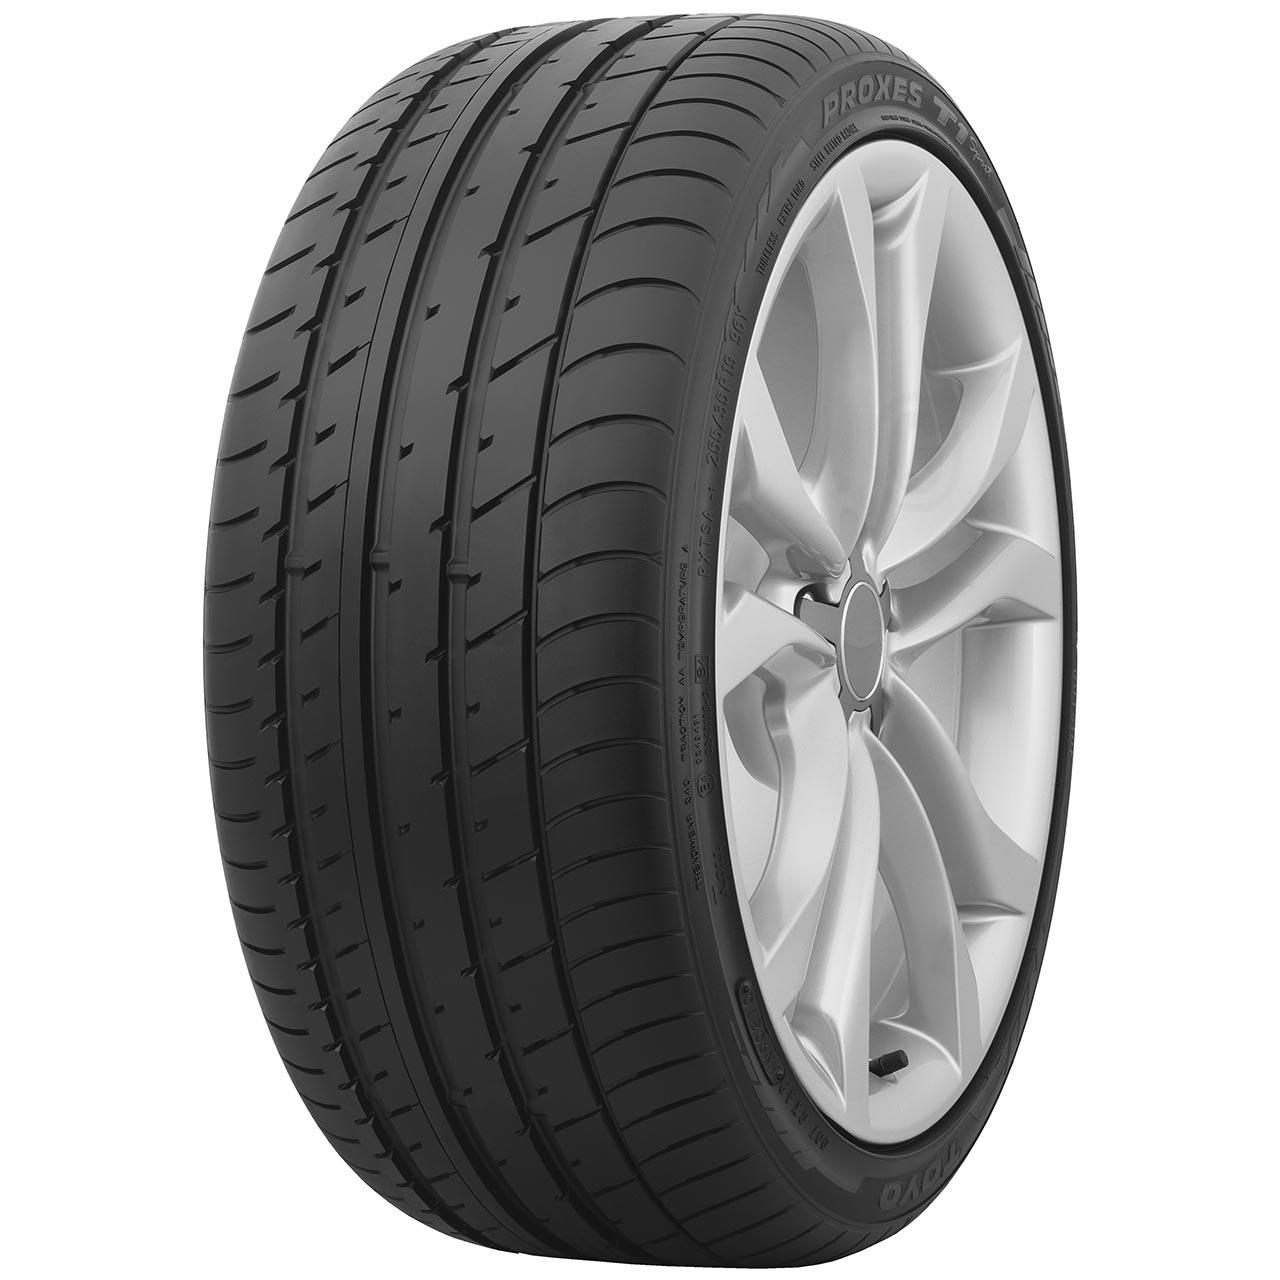 TOYO PROXES T1 SPORT